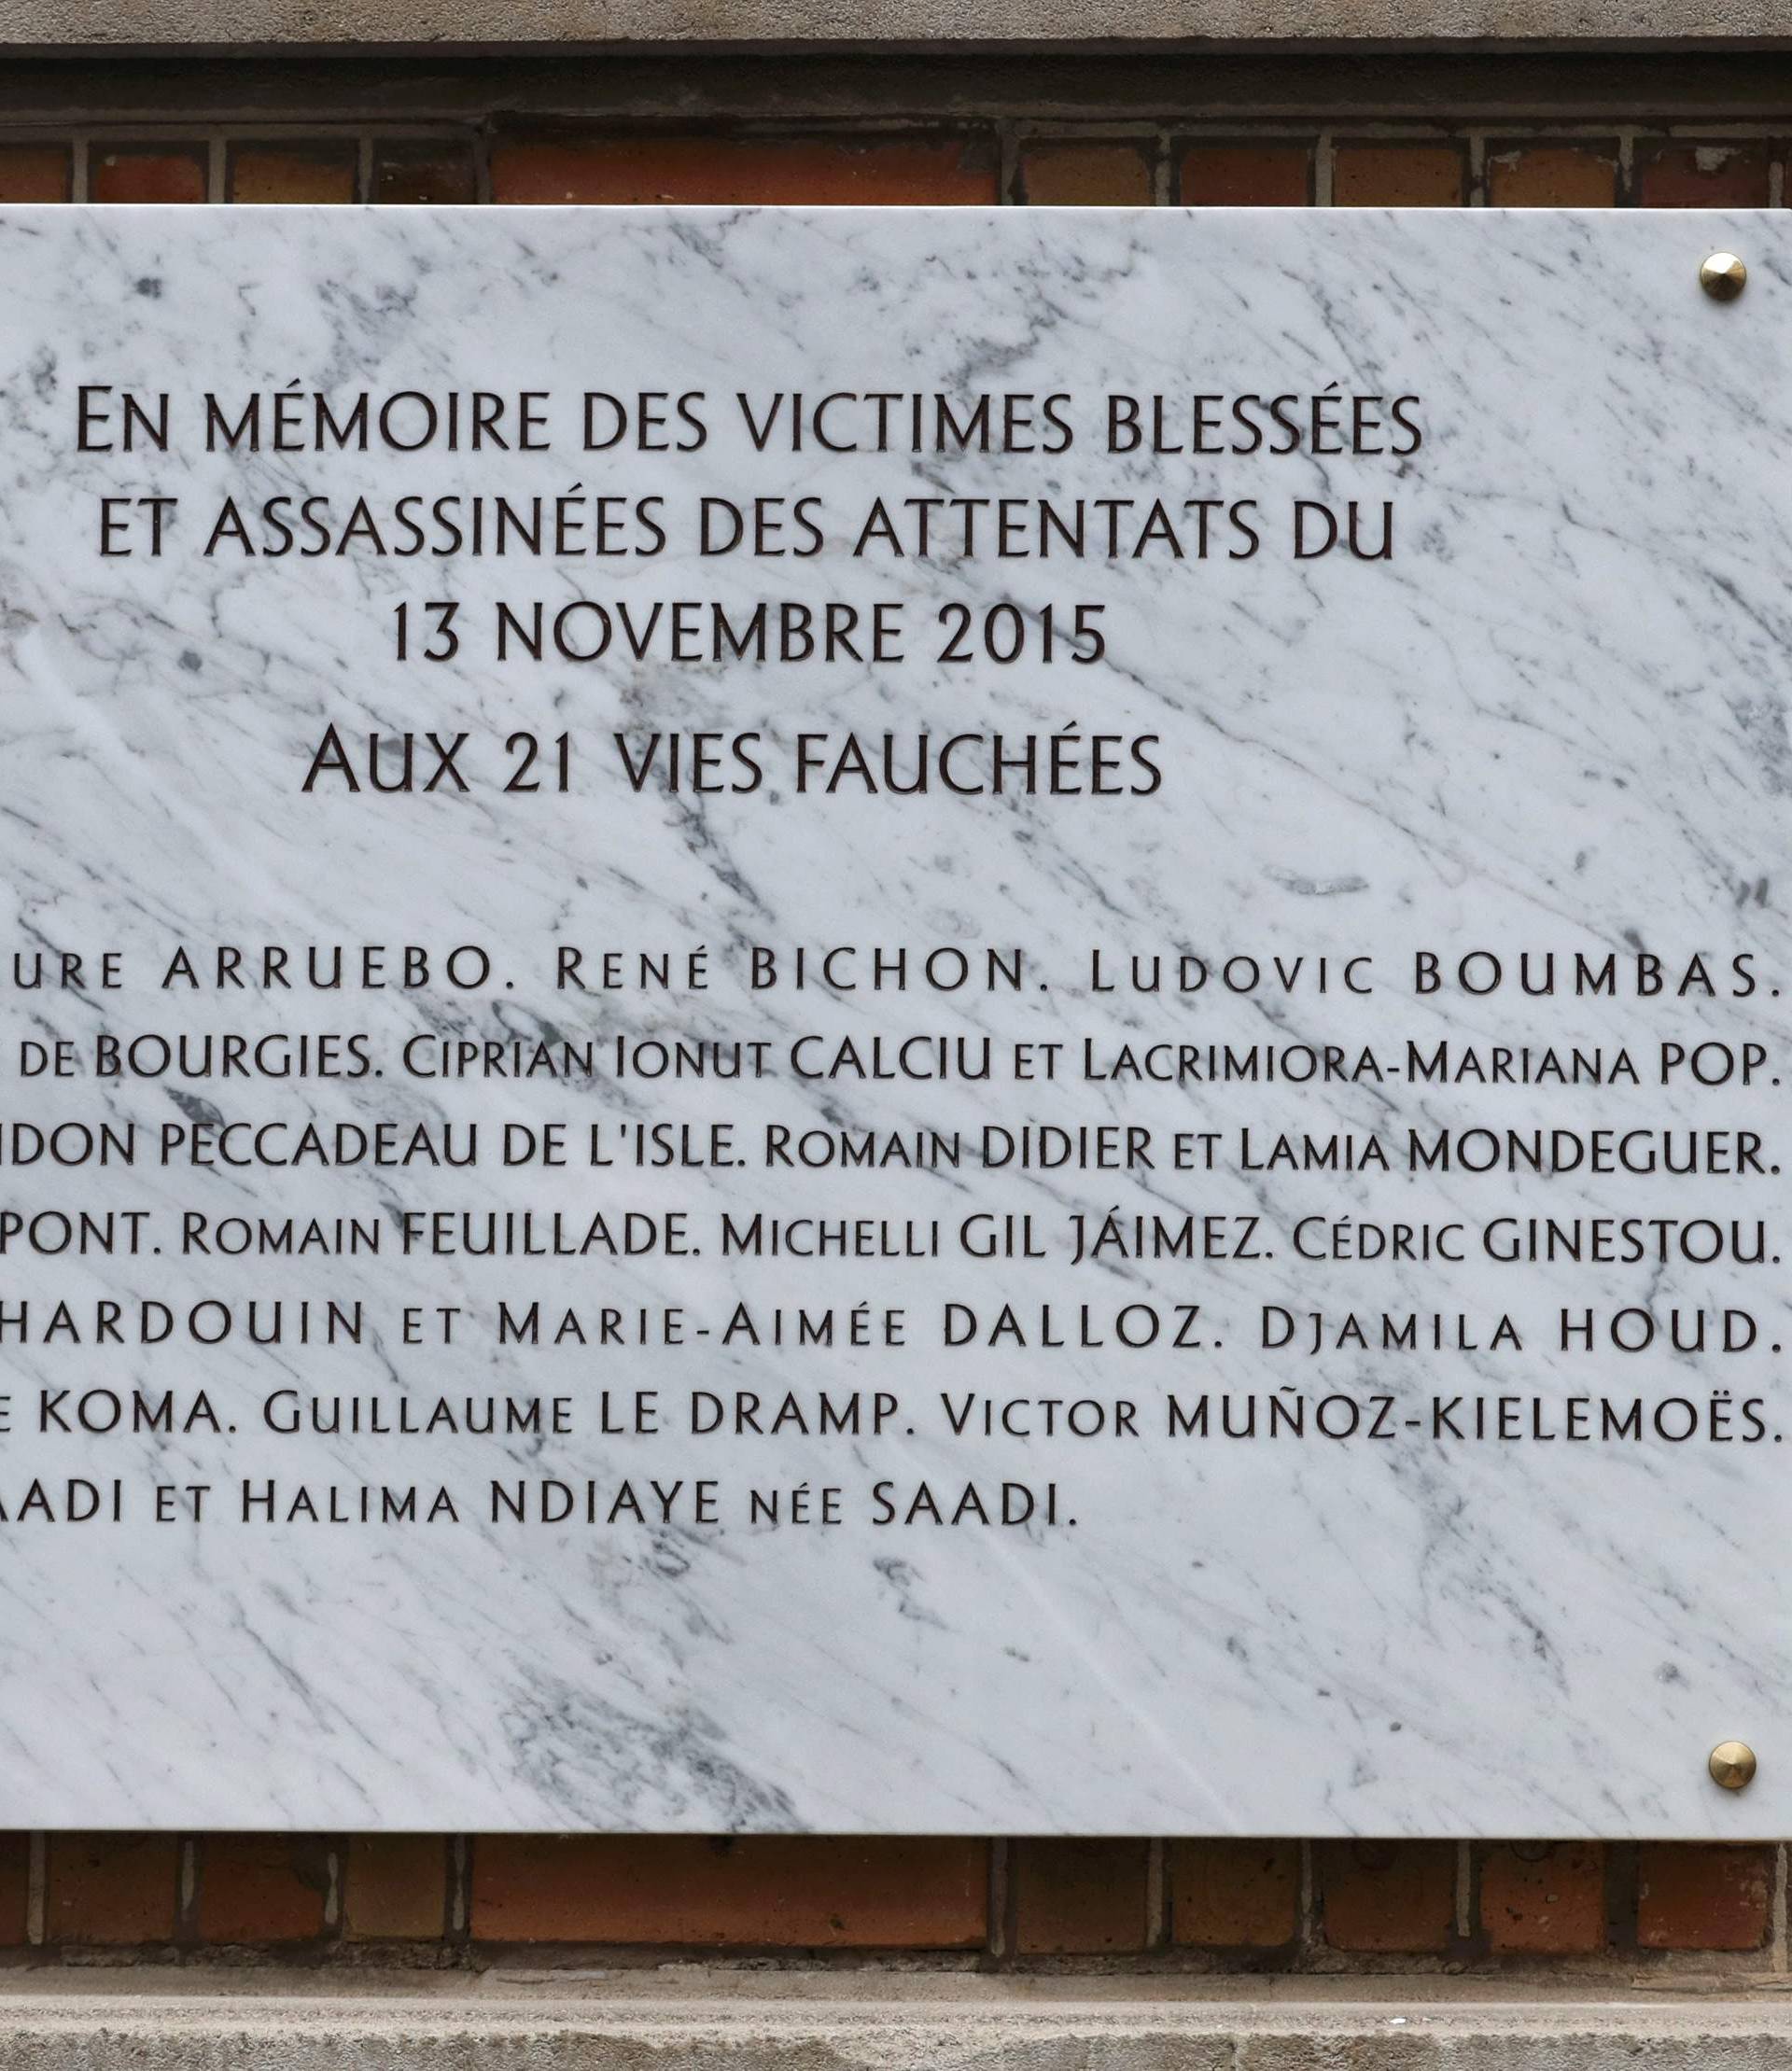 A commemorative plaque unveiled by French President Francois Hollande and Paris Mayor Anne Hidalgo is seen next to the "La Belle Equipe" bar and restaurant in Paris